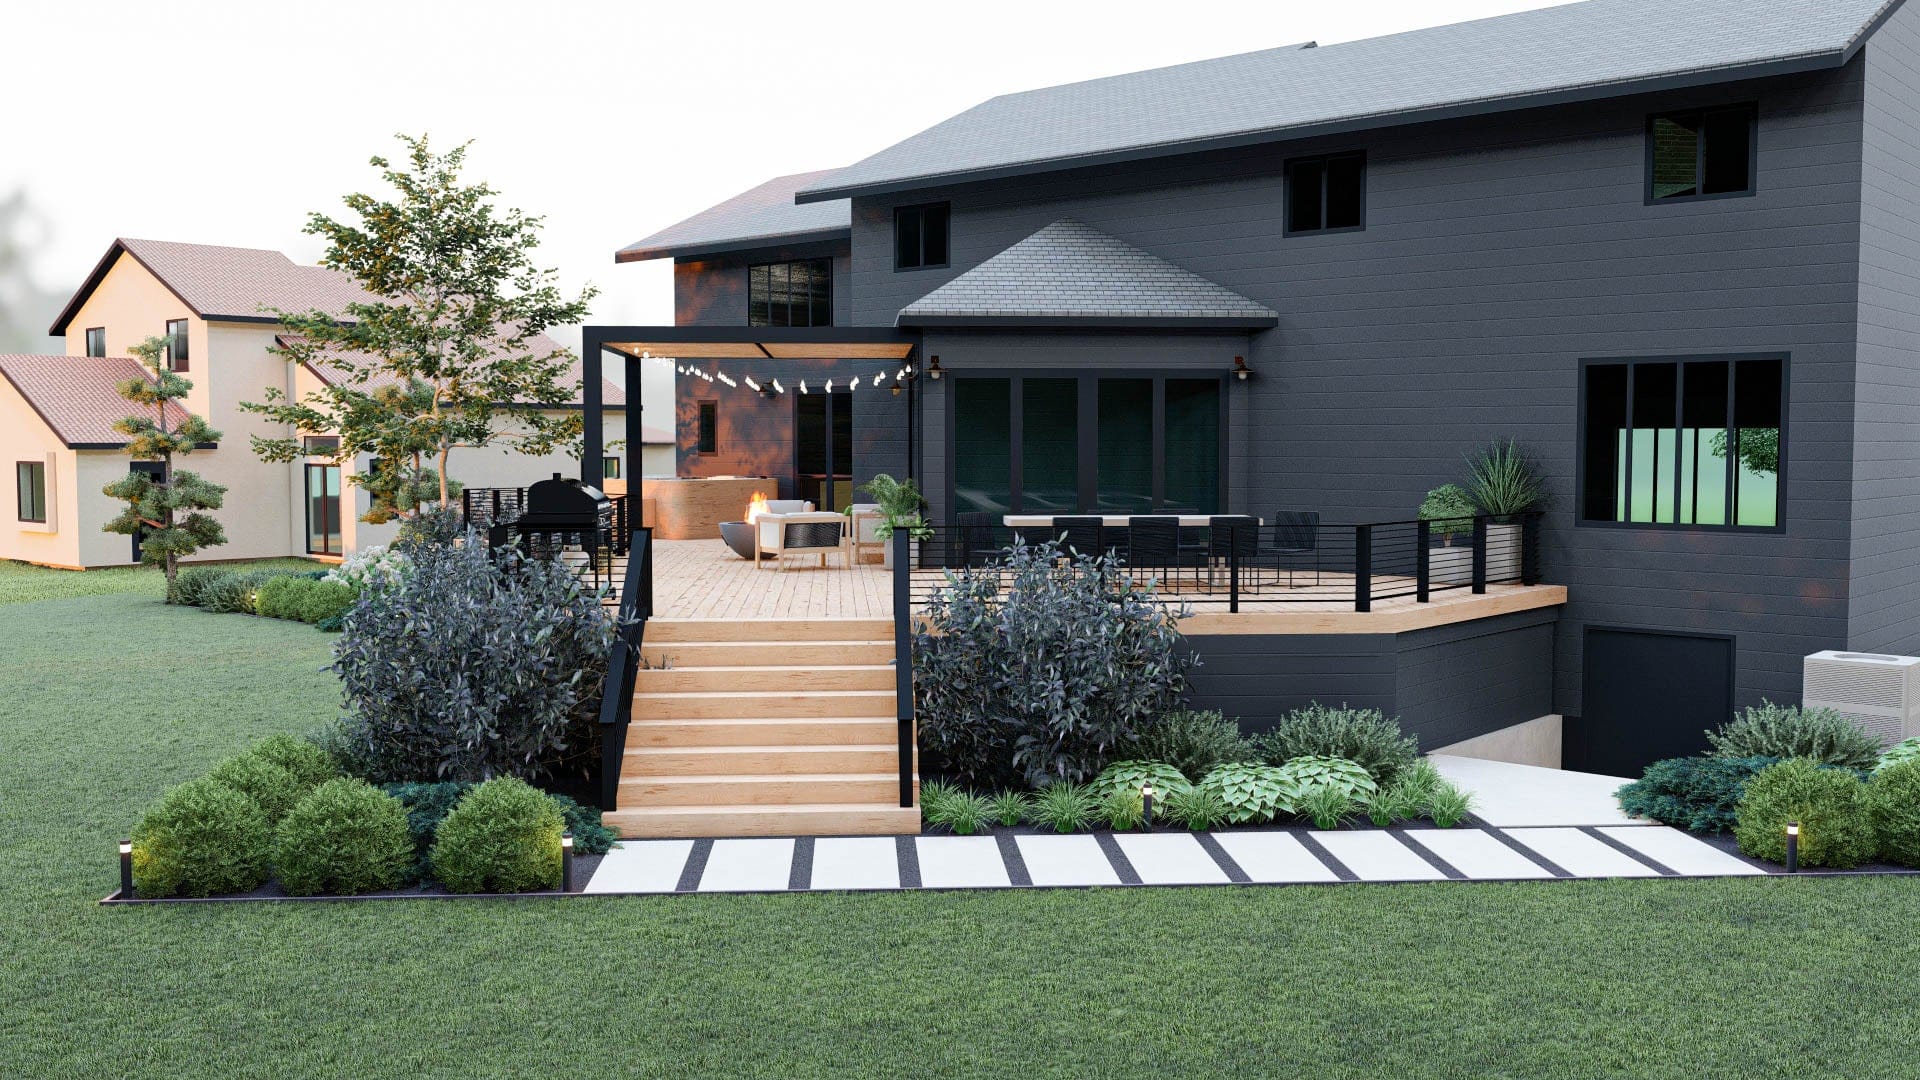 3D design render of yard with modern deck, pergola-covered fire pit seating area, and paver path and planting beds surrounding